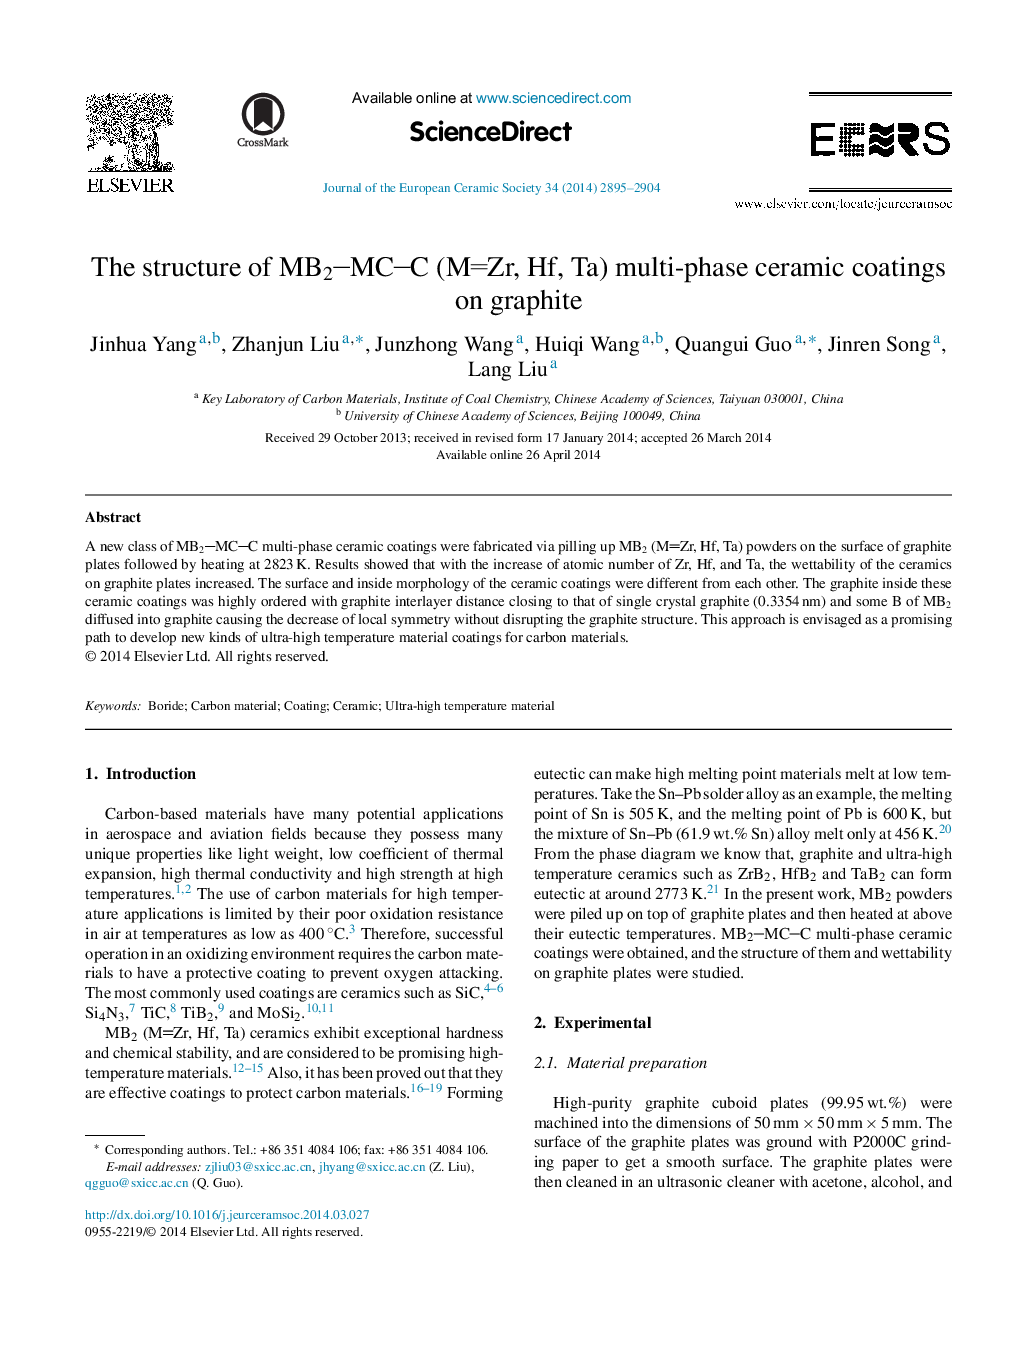 The structure of MB2MCC (MZr, Hf, Ta) multi-phase ceramic coatings on graphite